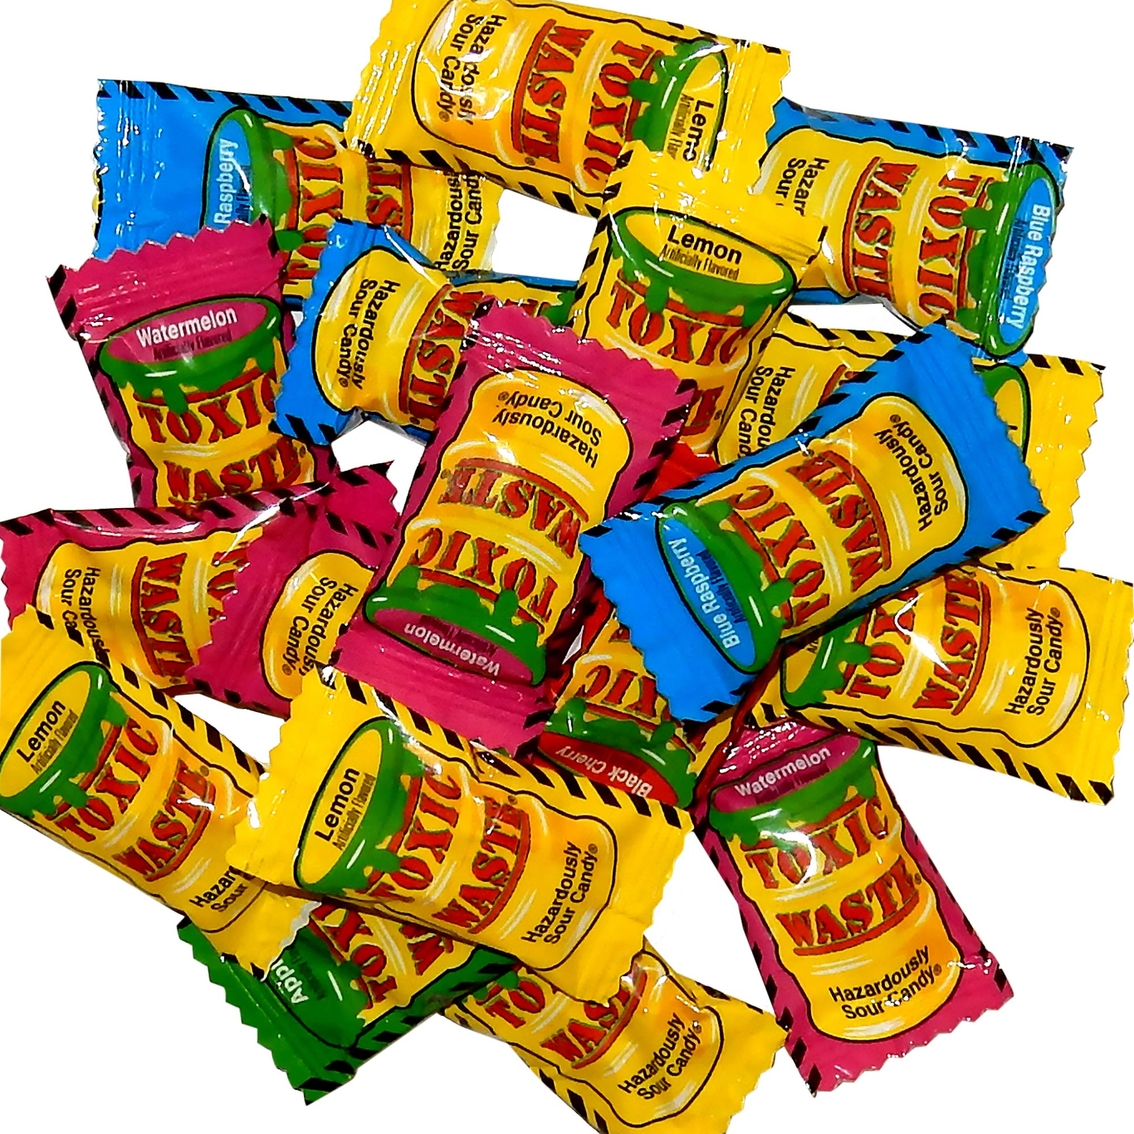 Toxic Waste 5 Flavor Sour Candy 12 pk. - Image 2 of 2